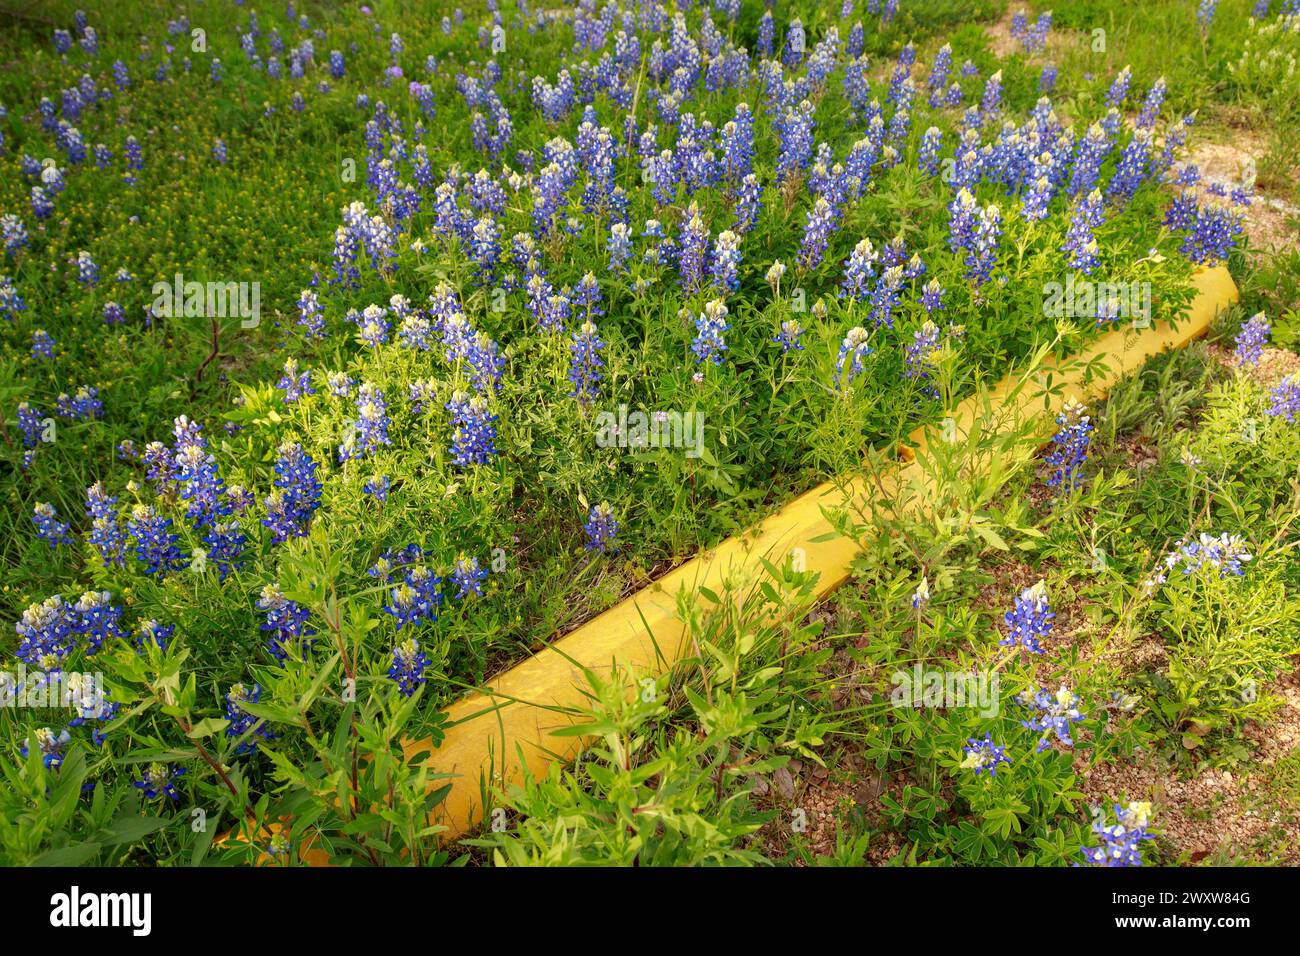 Vibrant bluebonnets are flourishing along a yellow-painted curb and parking lot amidst a green field and roadside patch of wildflowers. Stock Photo